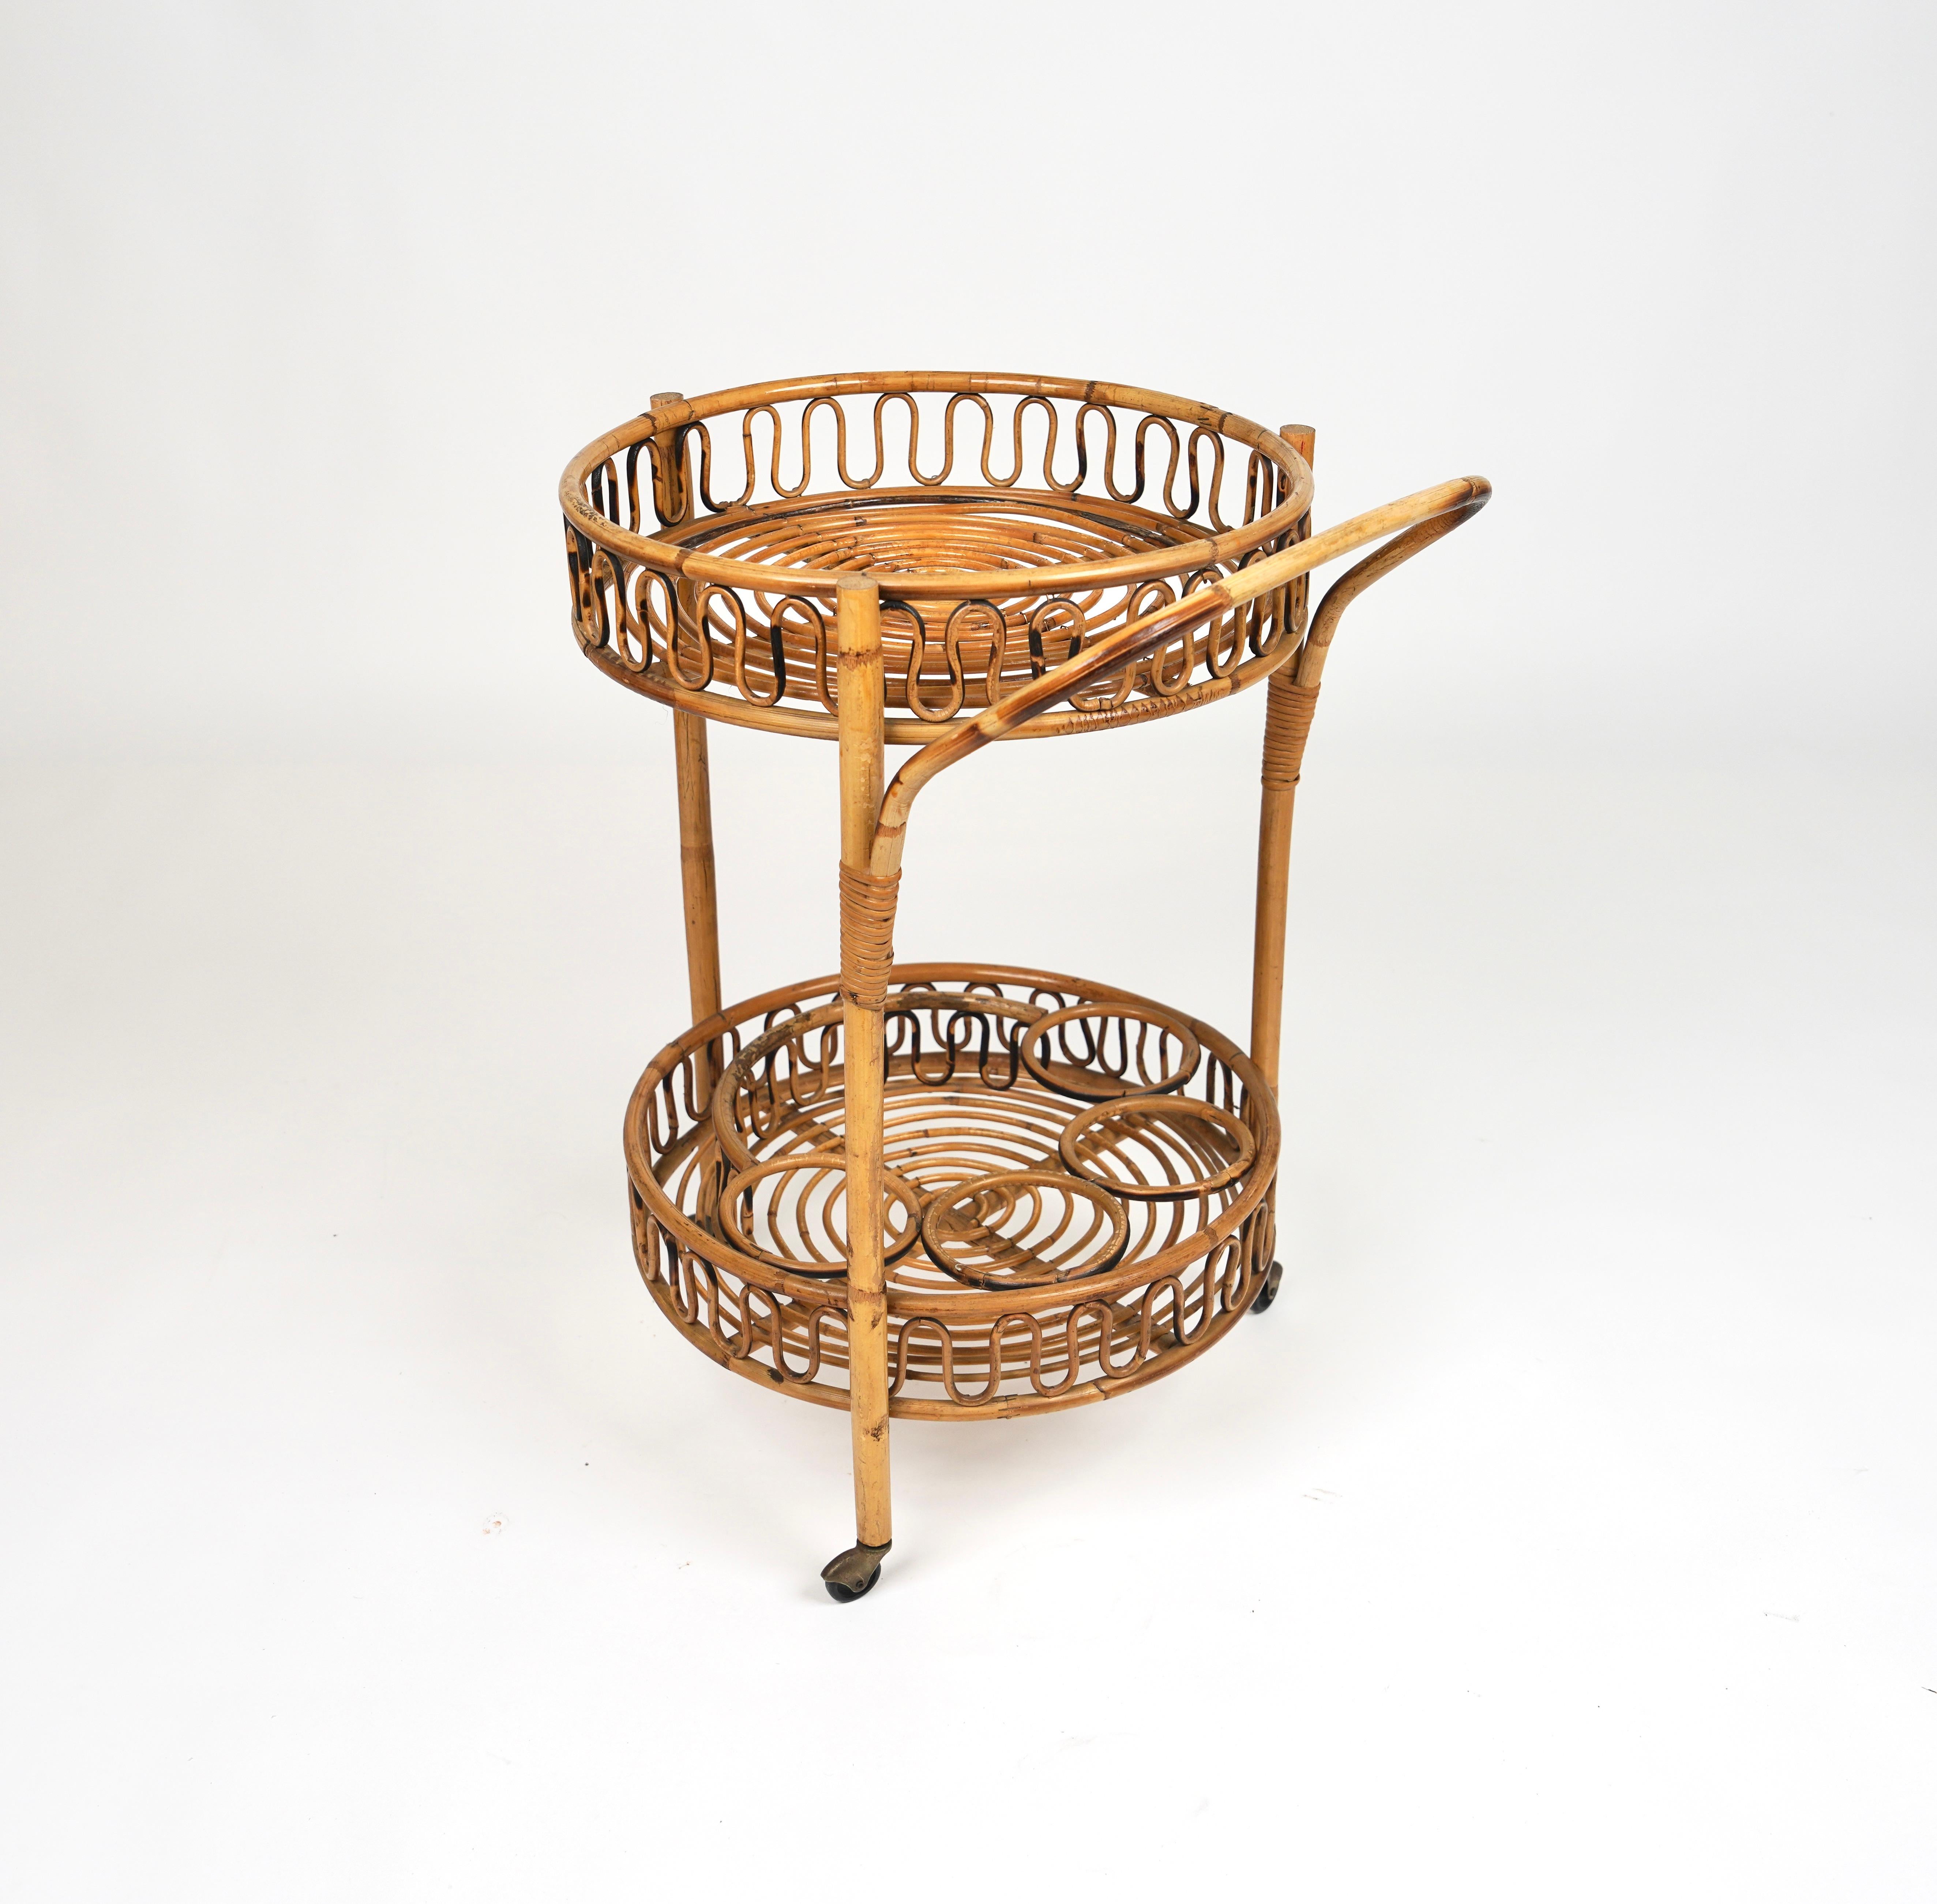 Midcentury Bamboo and Rattan Round Serving Bar Cart Trolley, Italy, circa 1960s For Sale 1